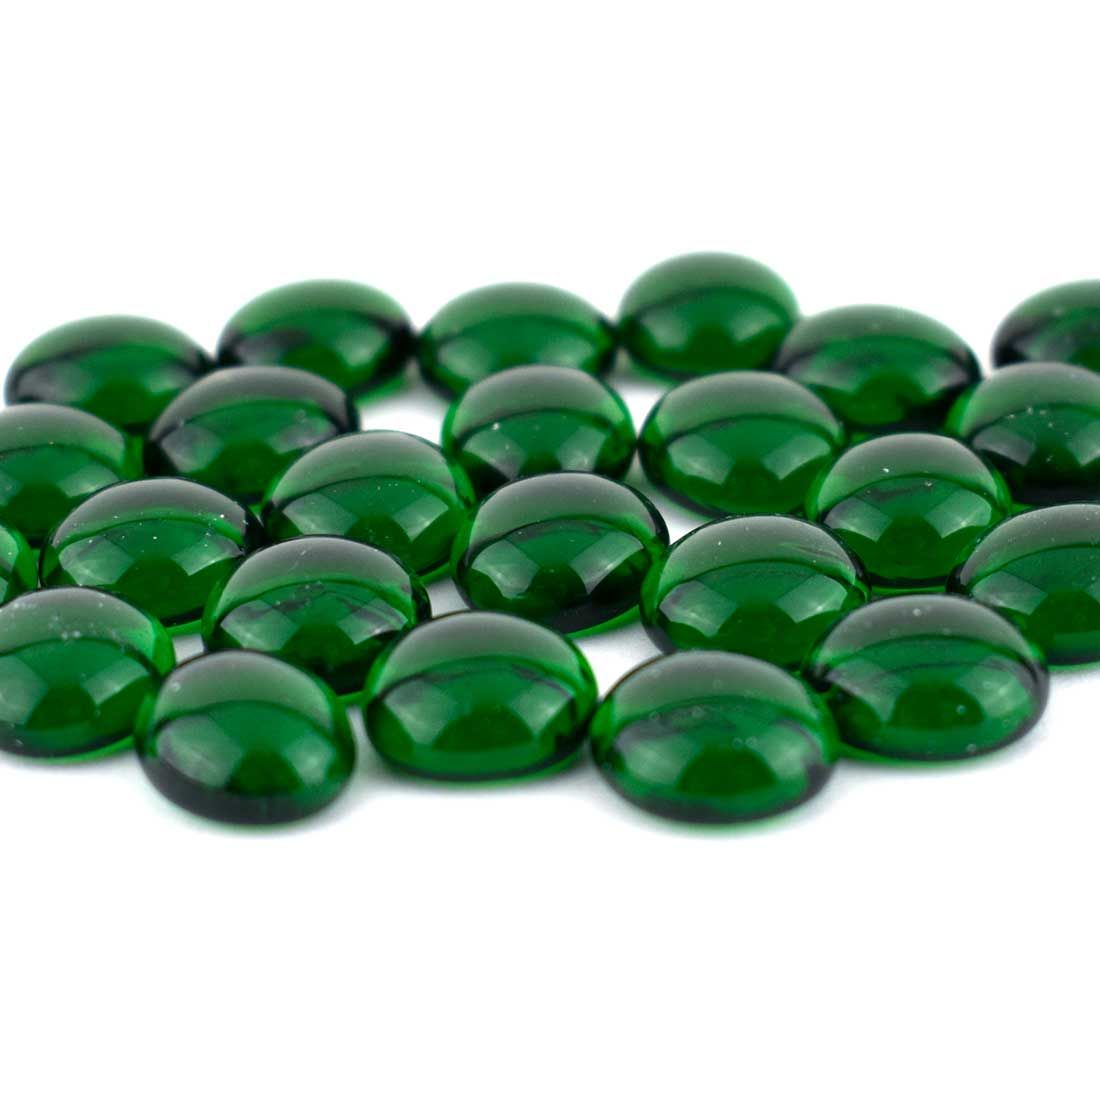 LIGHT GREEN CATHEDRAL PEBBLES by OCEANSIDE COMPATIBLE & SYS 96 GLASS